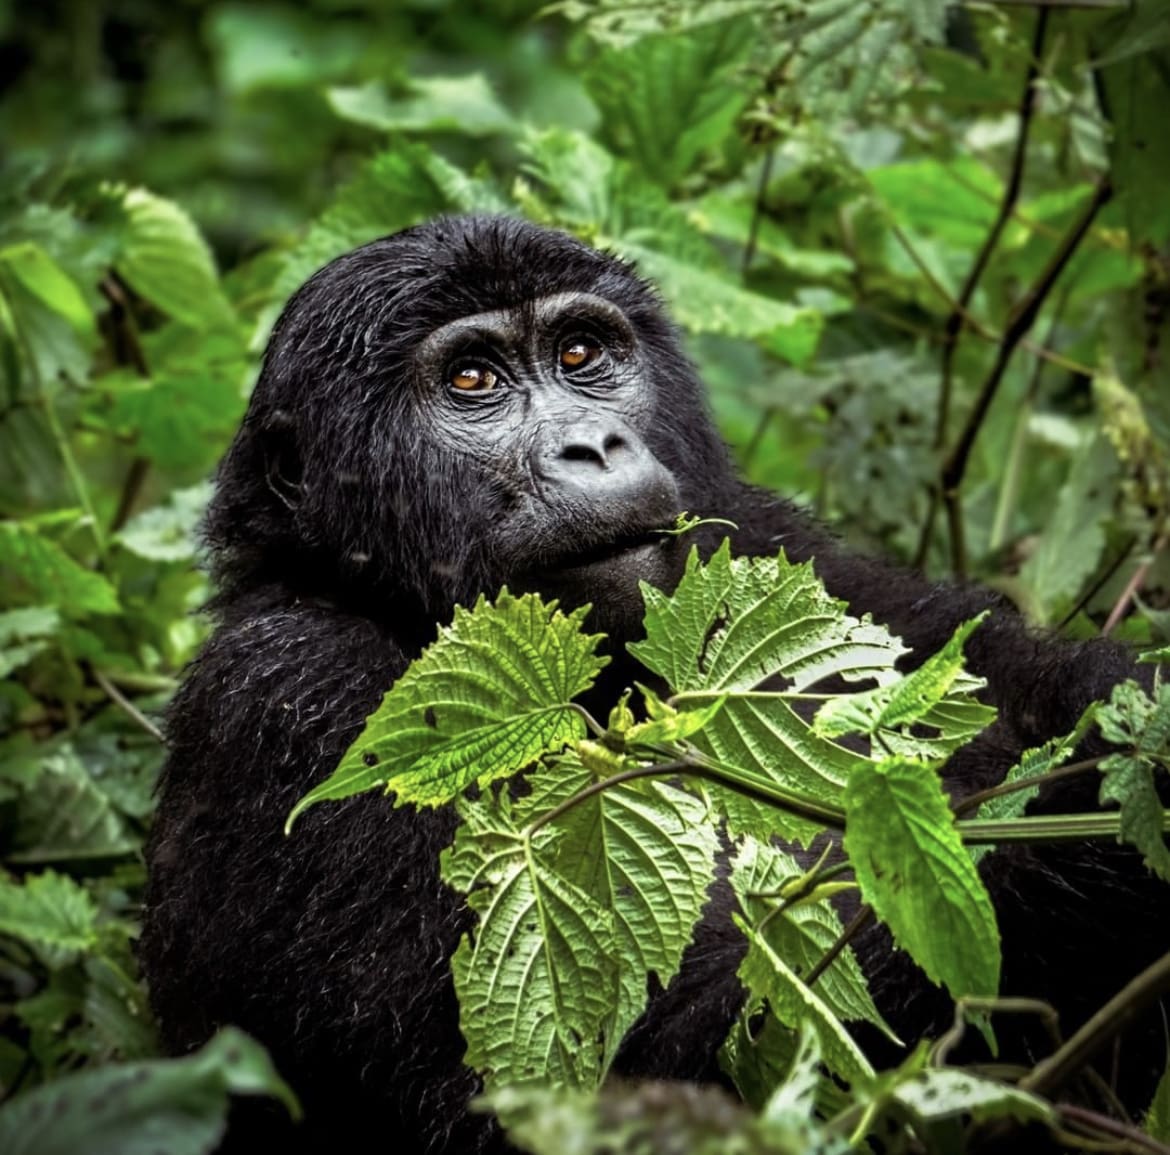 Young Gorilla in Bwindi Impenetrable National Park